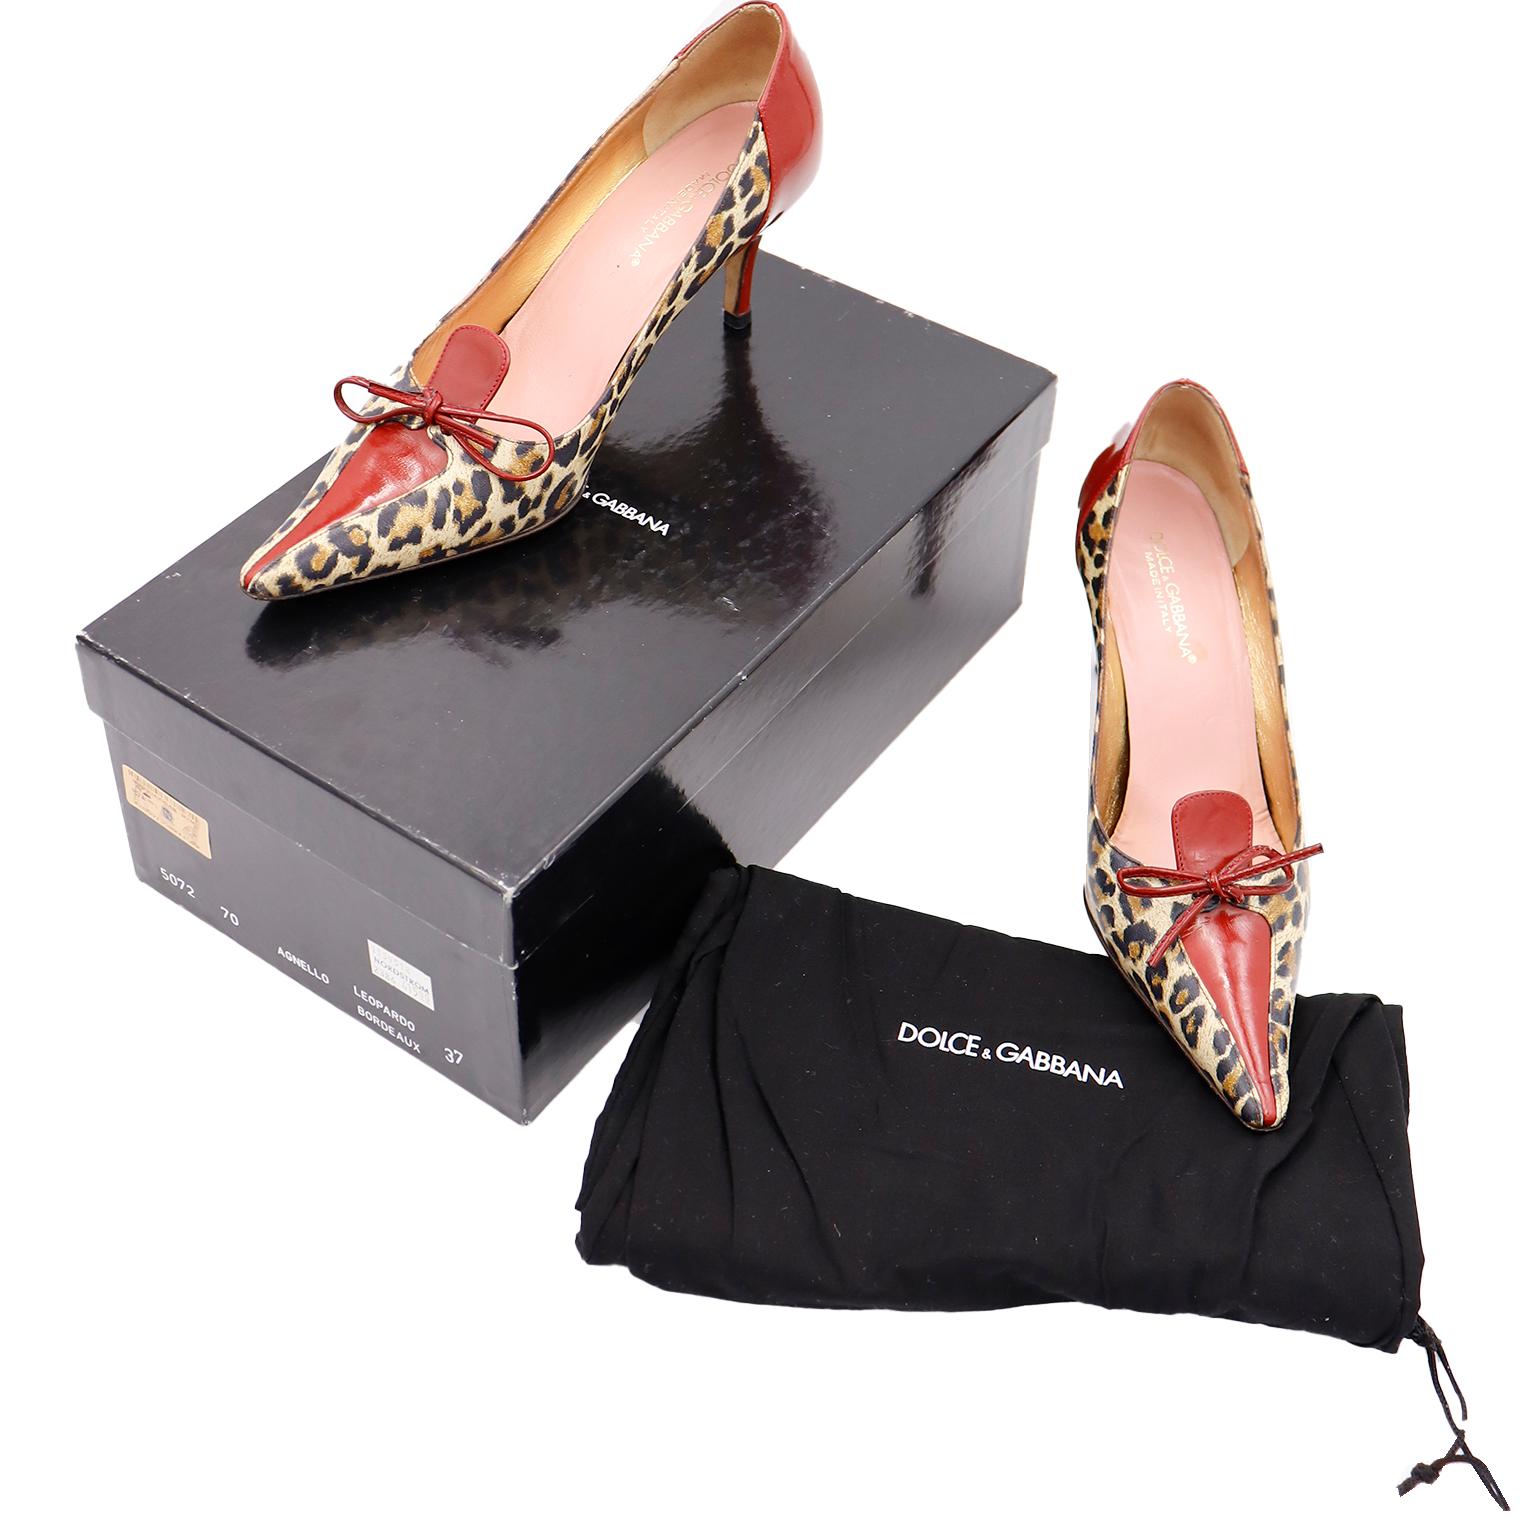 These Dolce & Gabbana leopard print leather heels have contrasting red leather on the back,heel, tongue/flap, and bow. These shoes come with their original box and dust bag and are labeled Dolce & Gabbana - Made in Italy.
Marked a size 36
HEEL